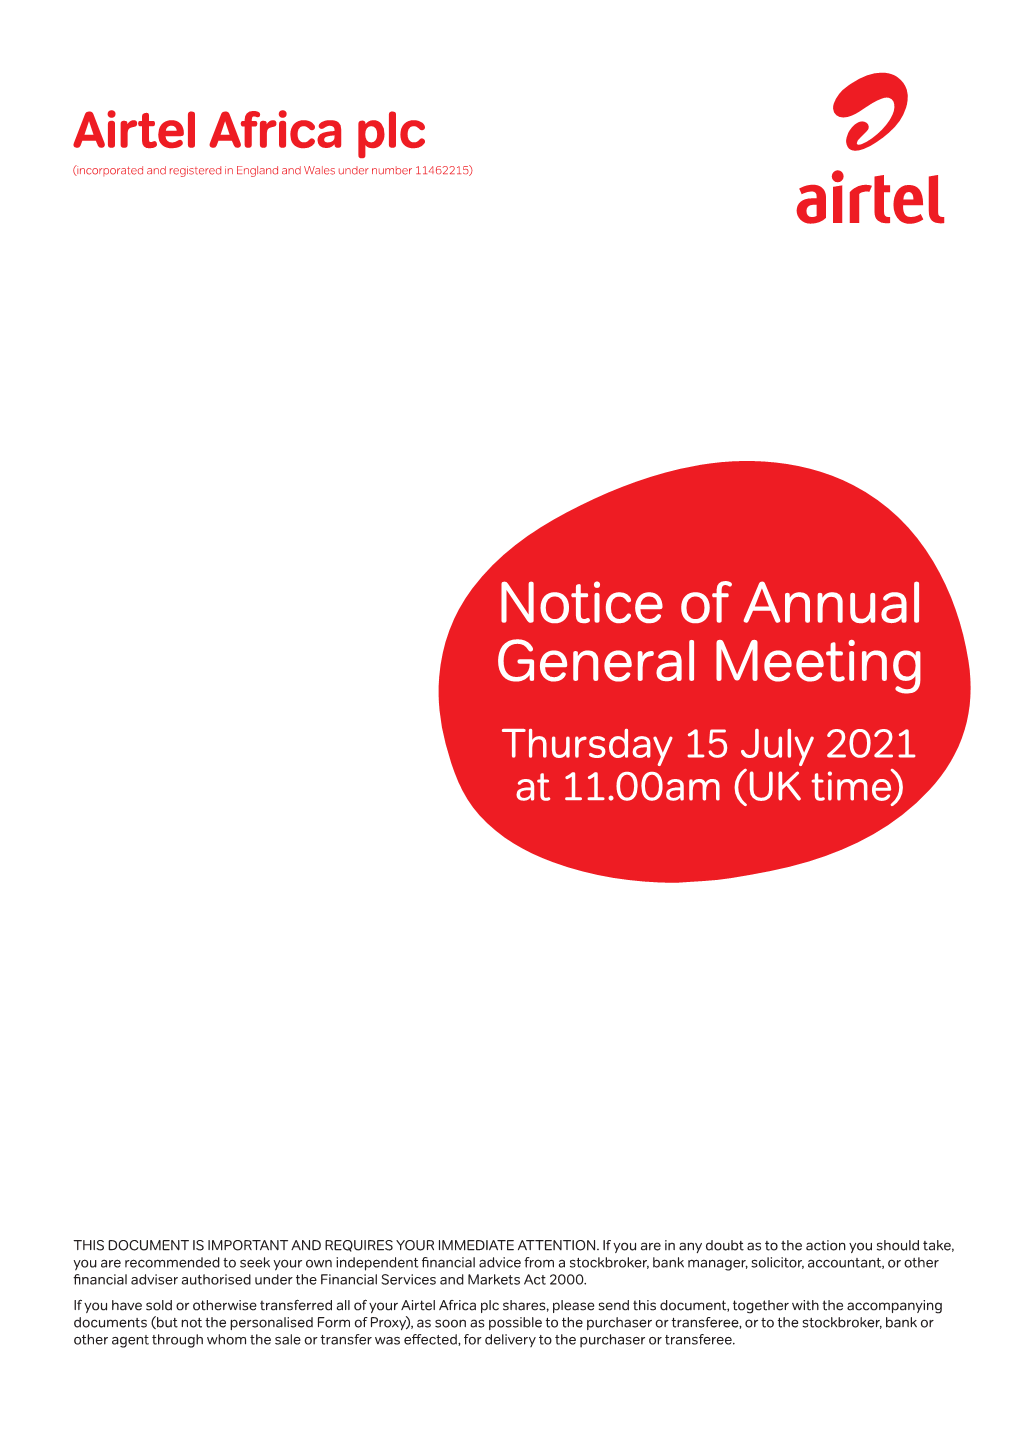 Notice of Annual General Meeting Thursday 15 July 2021 at 11.00Am (UK Time)